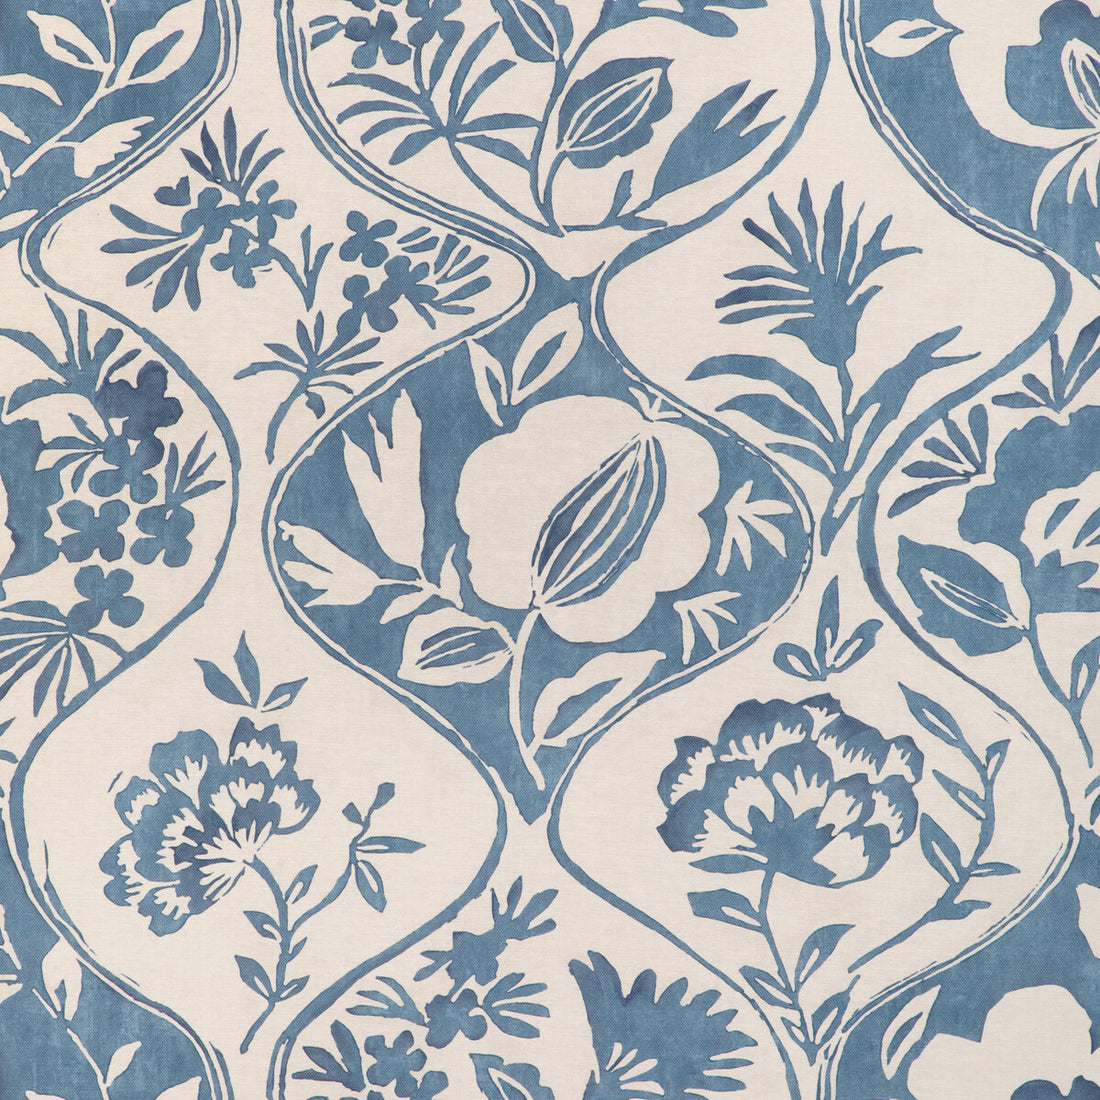 Calathea Print fabric in blue color - pattern 2023141.5.0 - by Lee Jofa in the Garden Walk collection